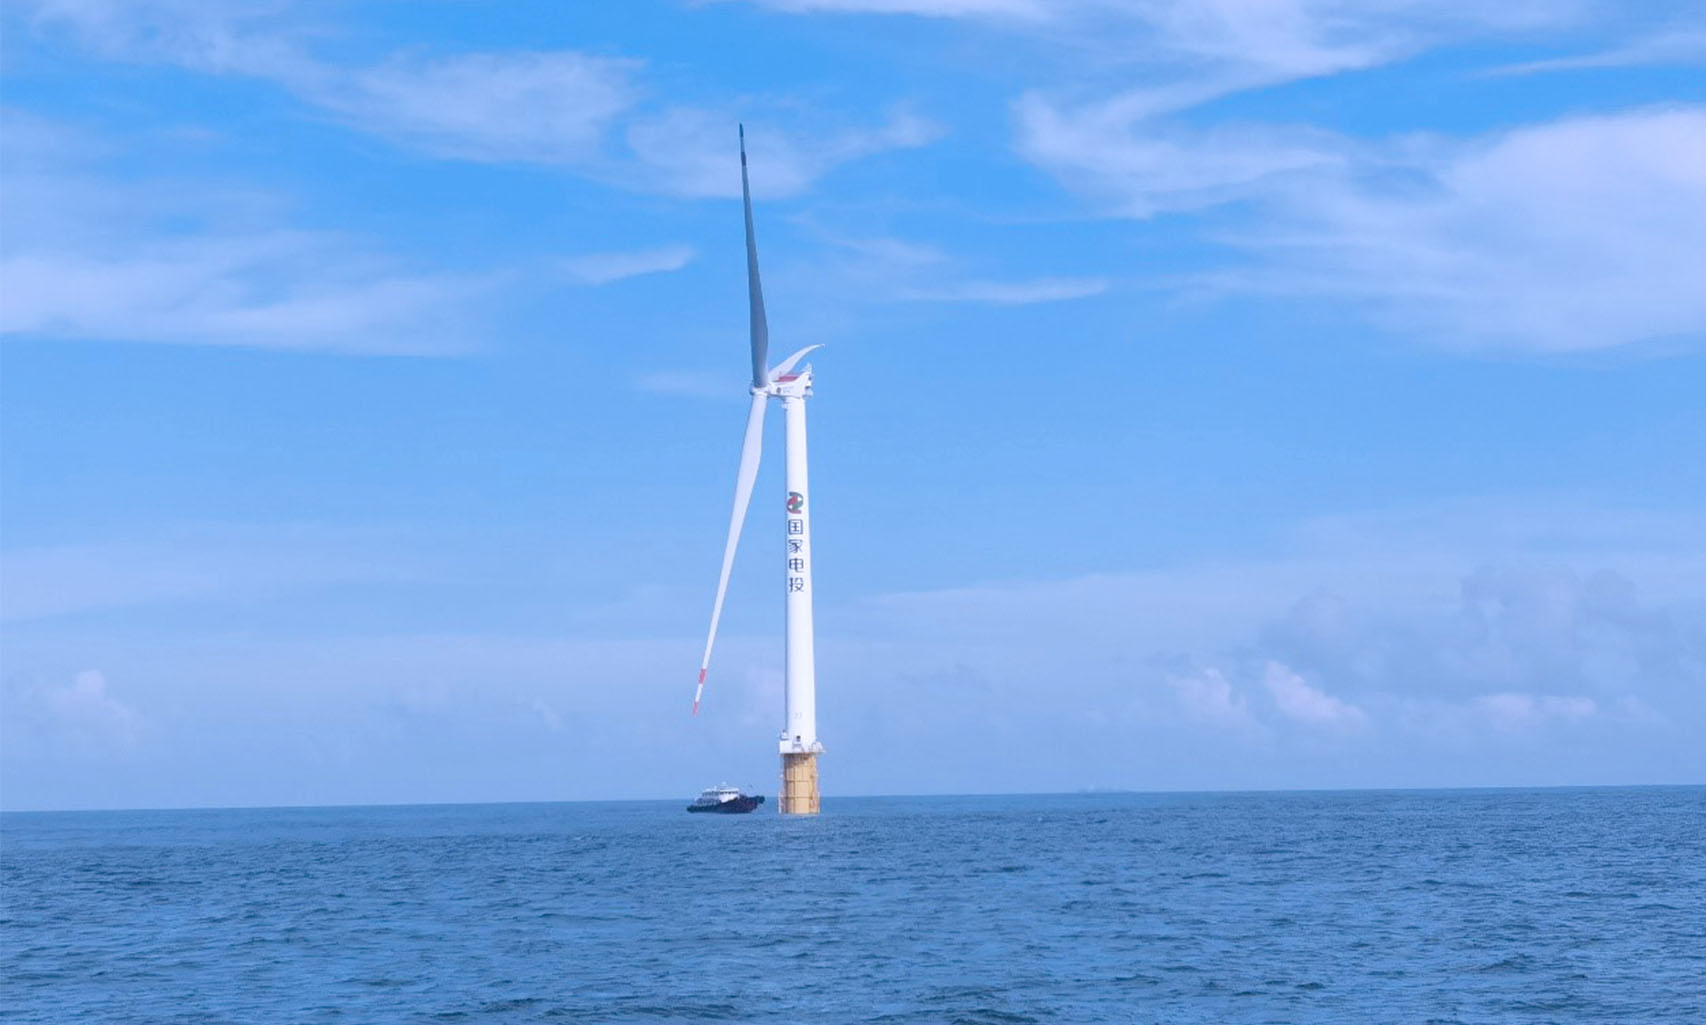 All-out effort, NOA helps SPIC offshore wind power projects to launch